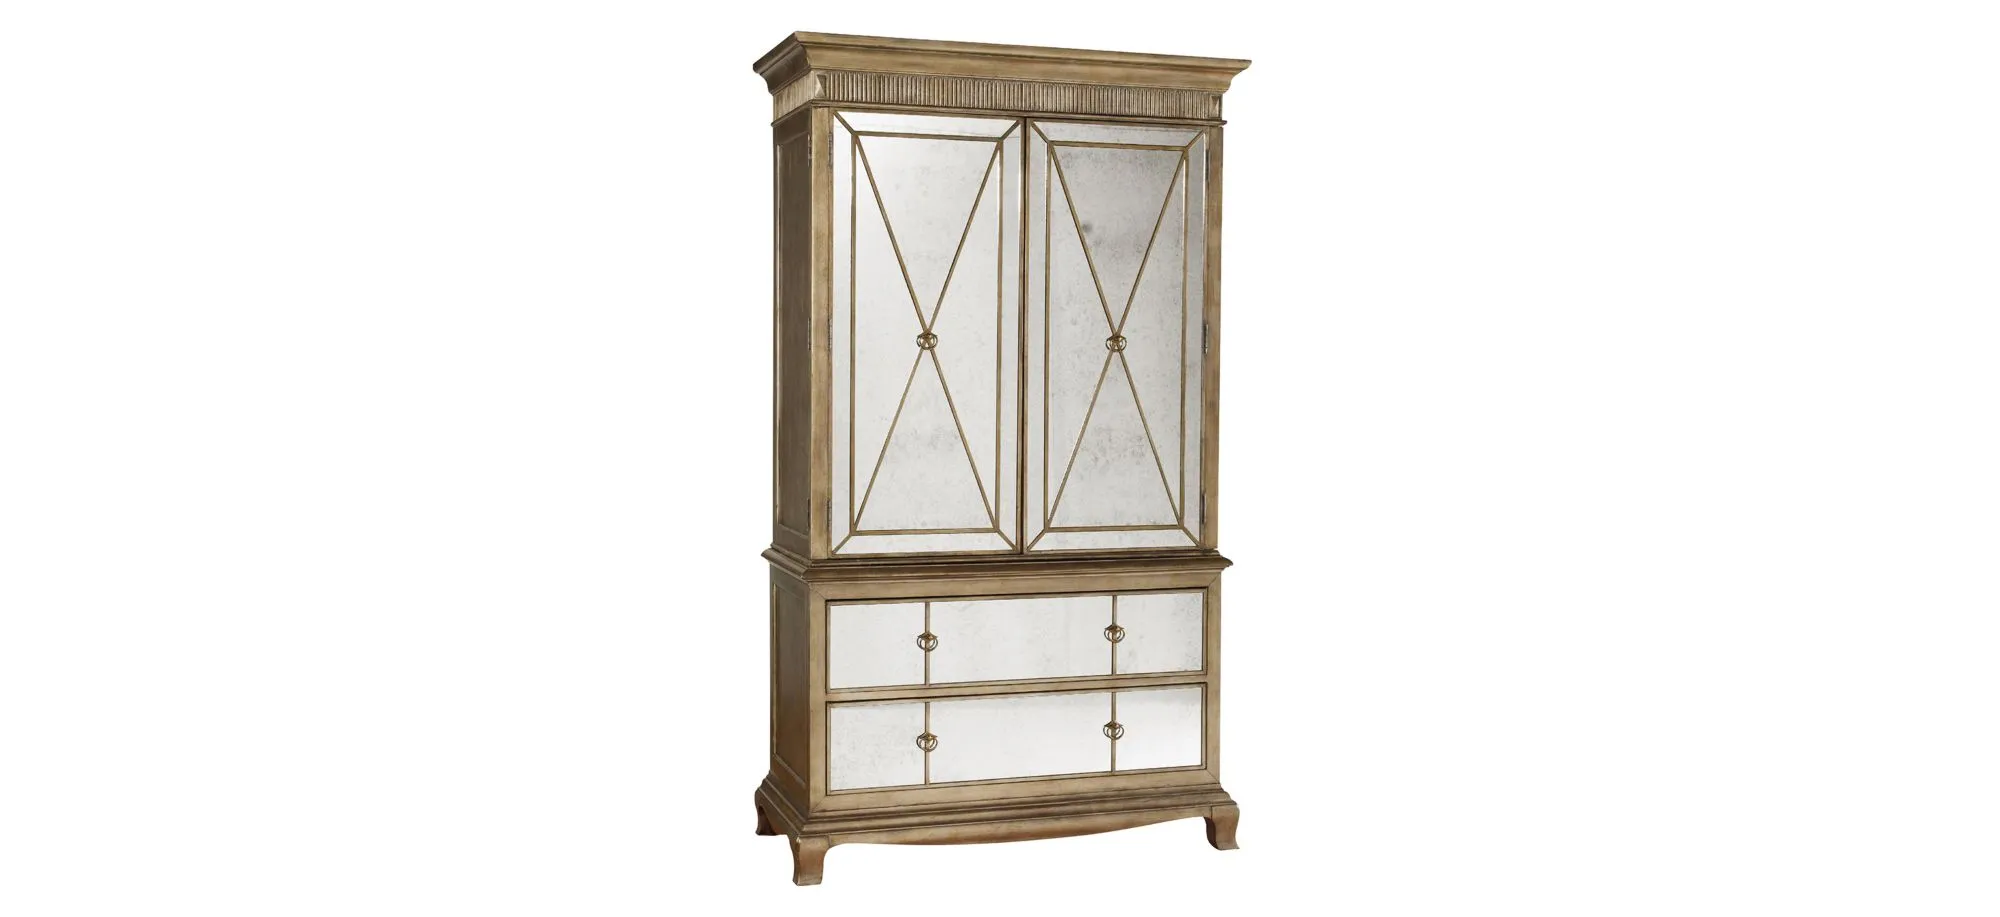 Sanctuary Armoire in Visage by Hooker Furniture